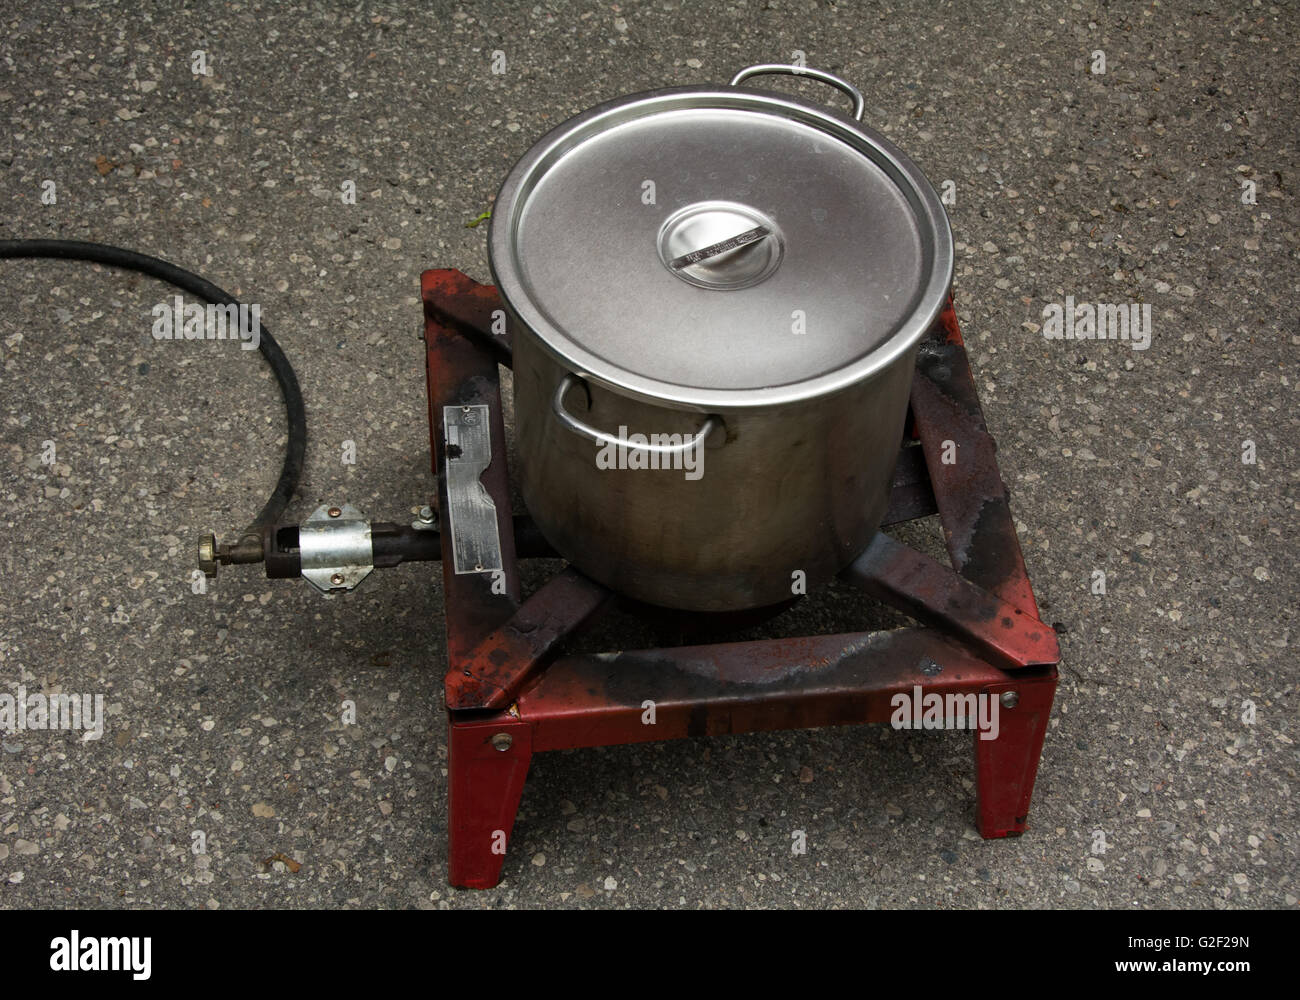 A pot on a propane burner used for boiling grains and extracts for a batch of home made beer Stock Photo